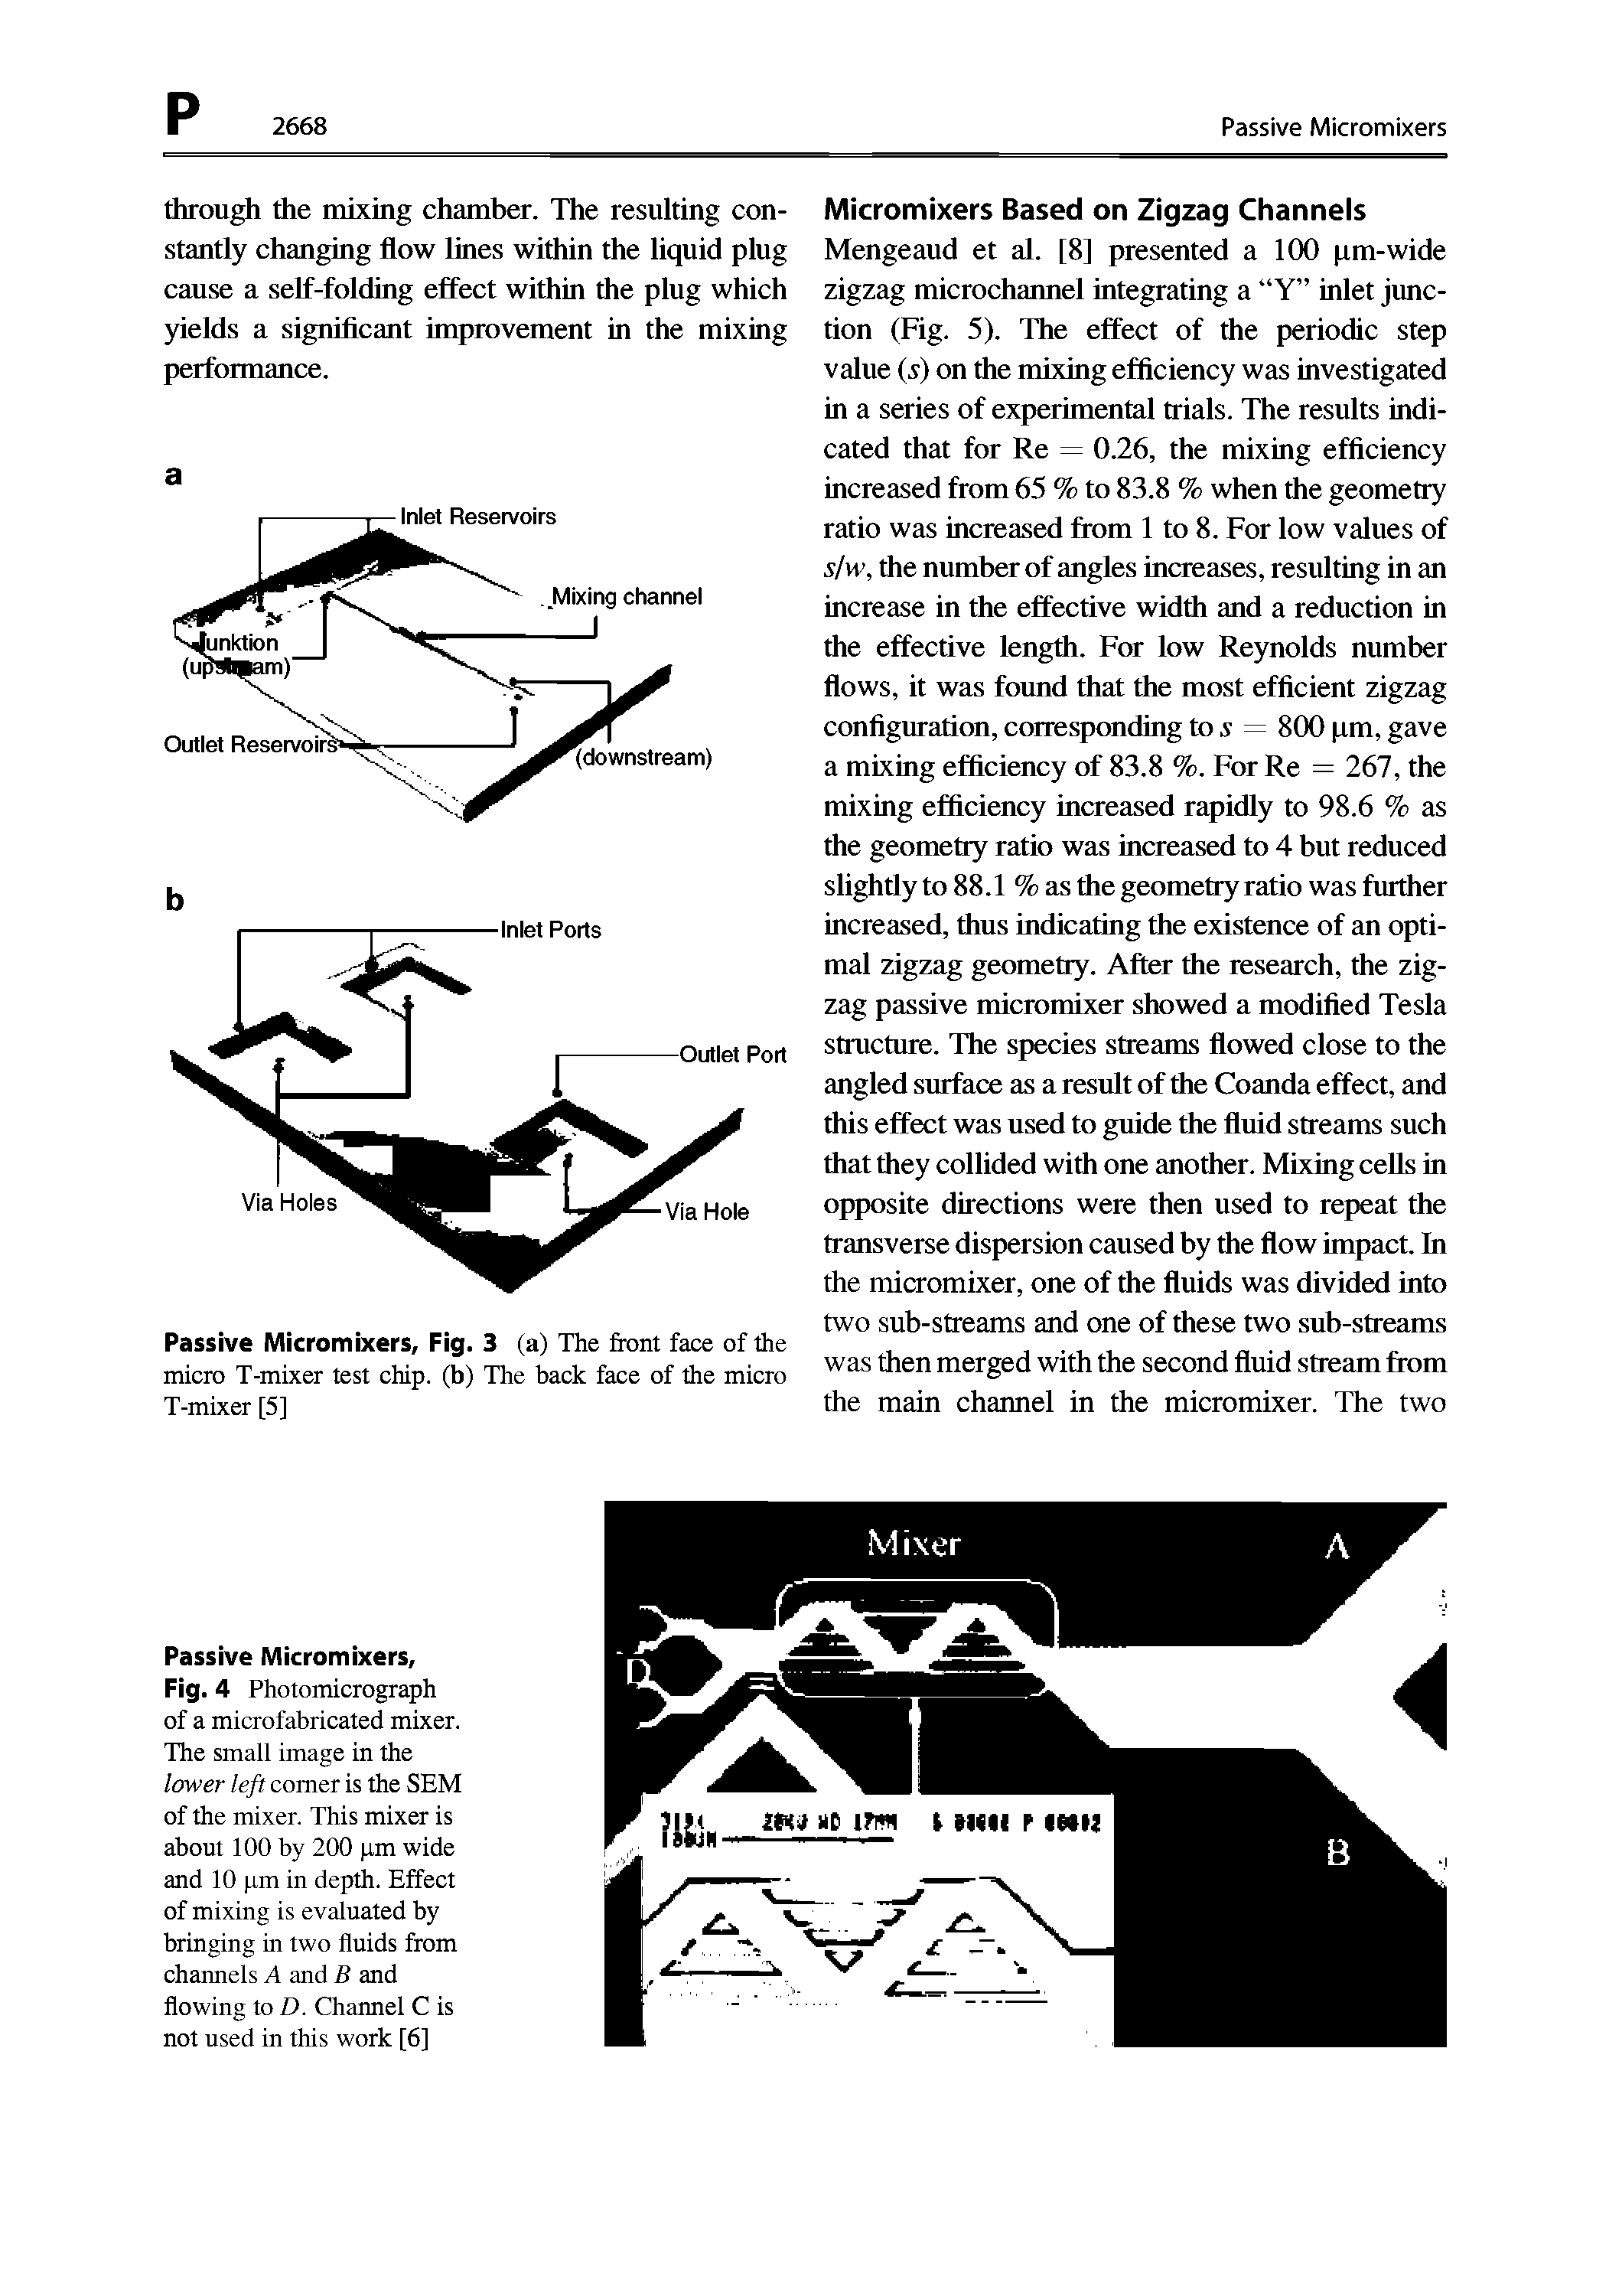 Fig. 4 Photomicrograph of a microfabricated mixer. The small image in the Icwer left comer is the SEM of the mixer. This mixer is about 100 by 200 pm wide and 10 pm in depth. Effect of mixing is evaluated by bringing in two fluids from channels A and B and flowing to D. Channel C is not used in this work [6]...